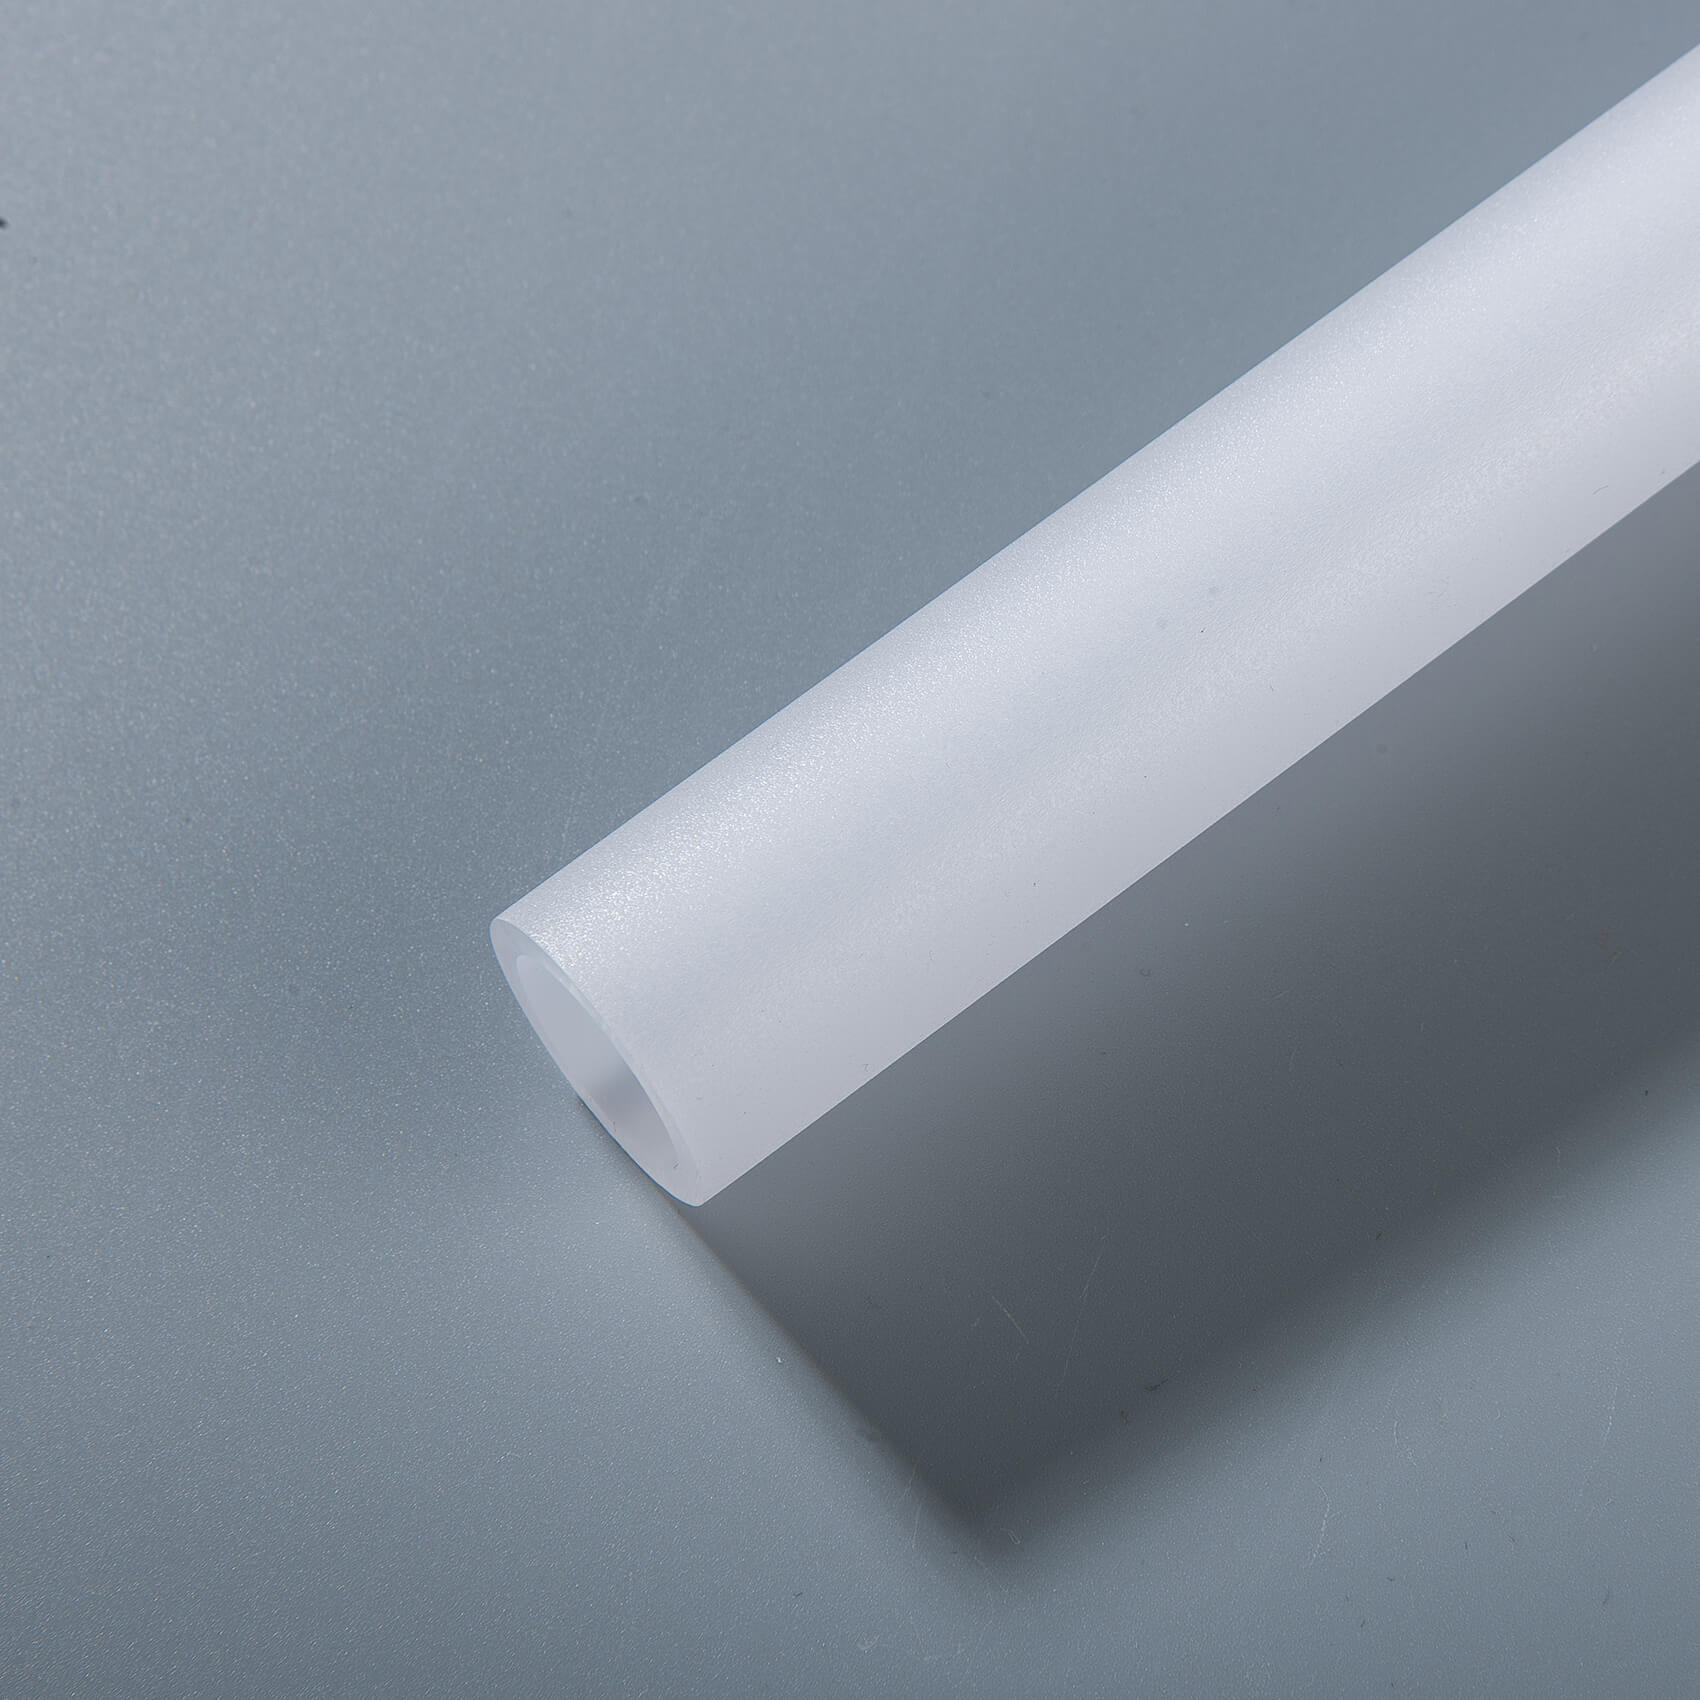 MIngshi extruded frosted acrylic tubes